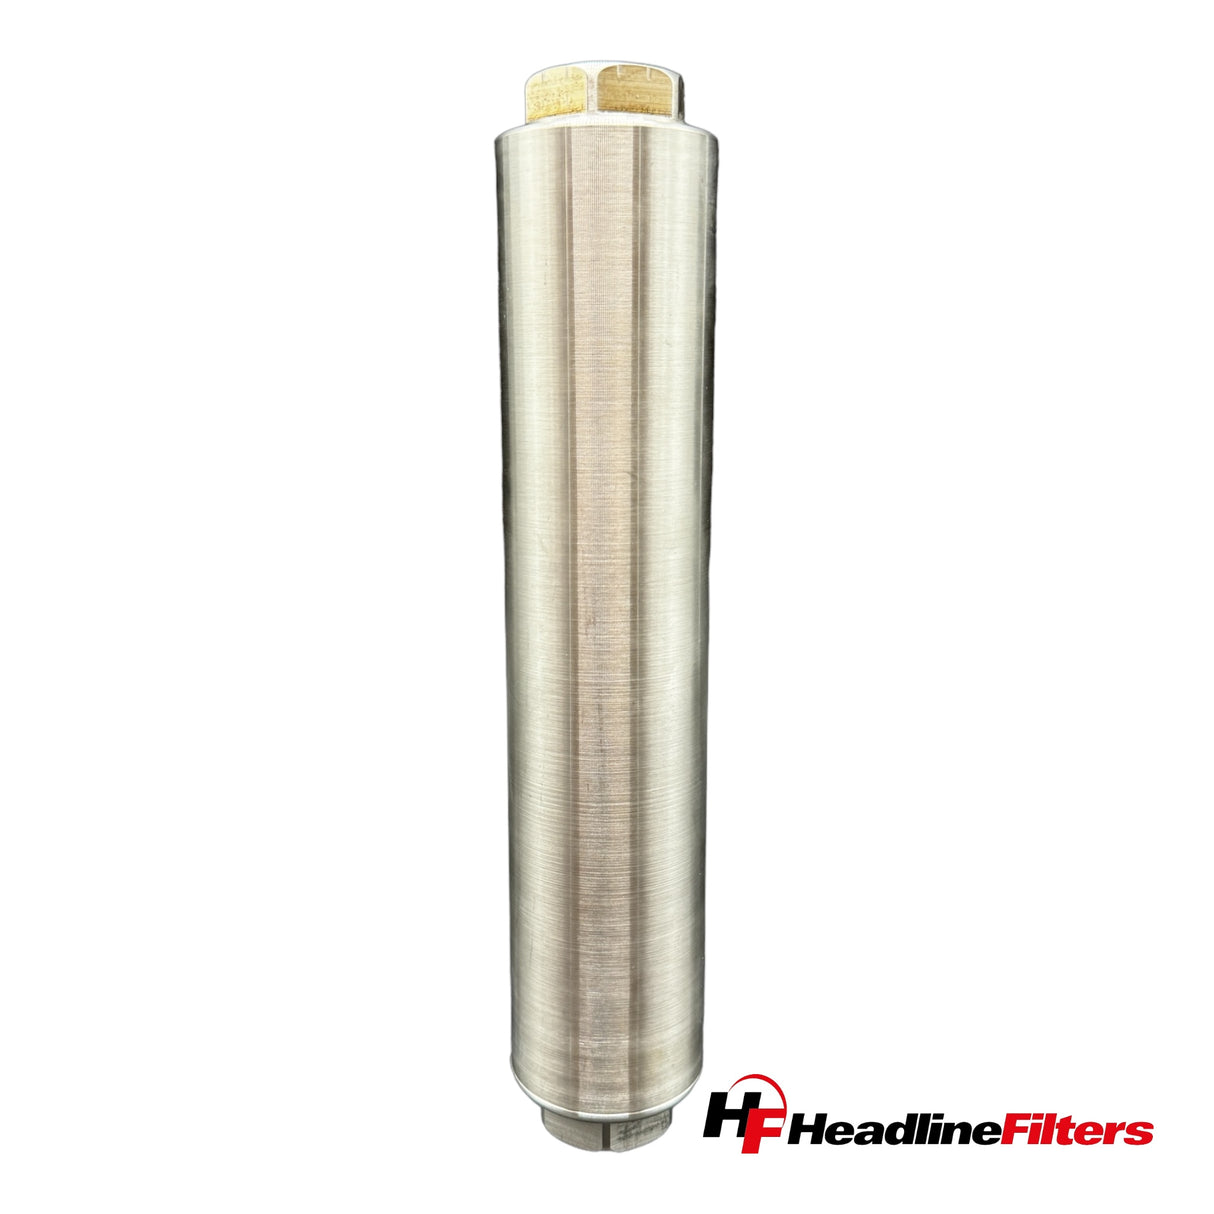 Stainless Steel Filter Housing - Model 146IL